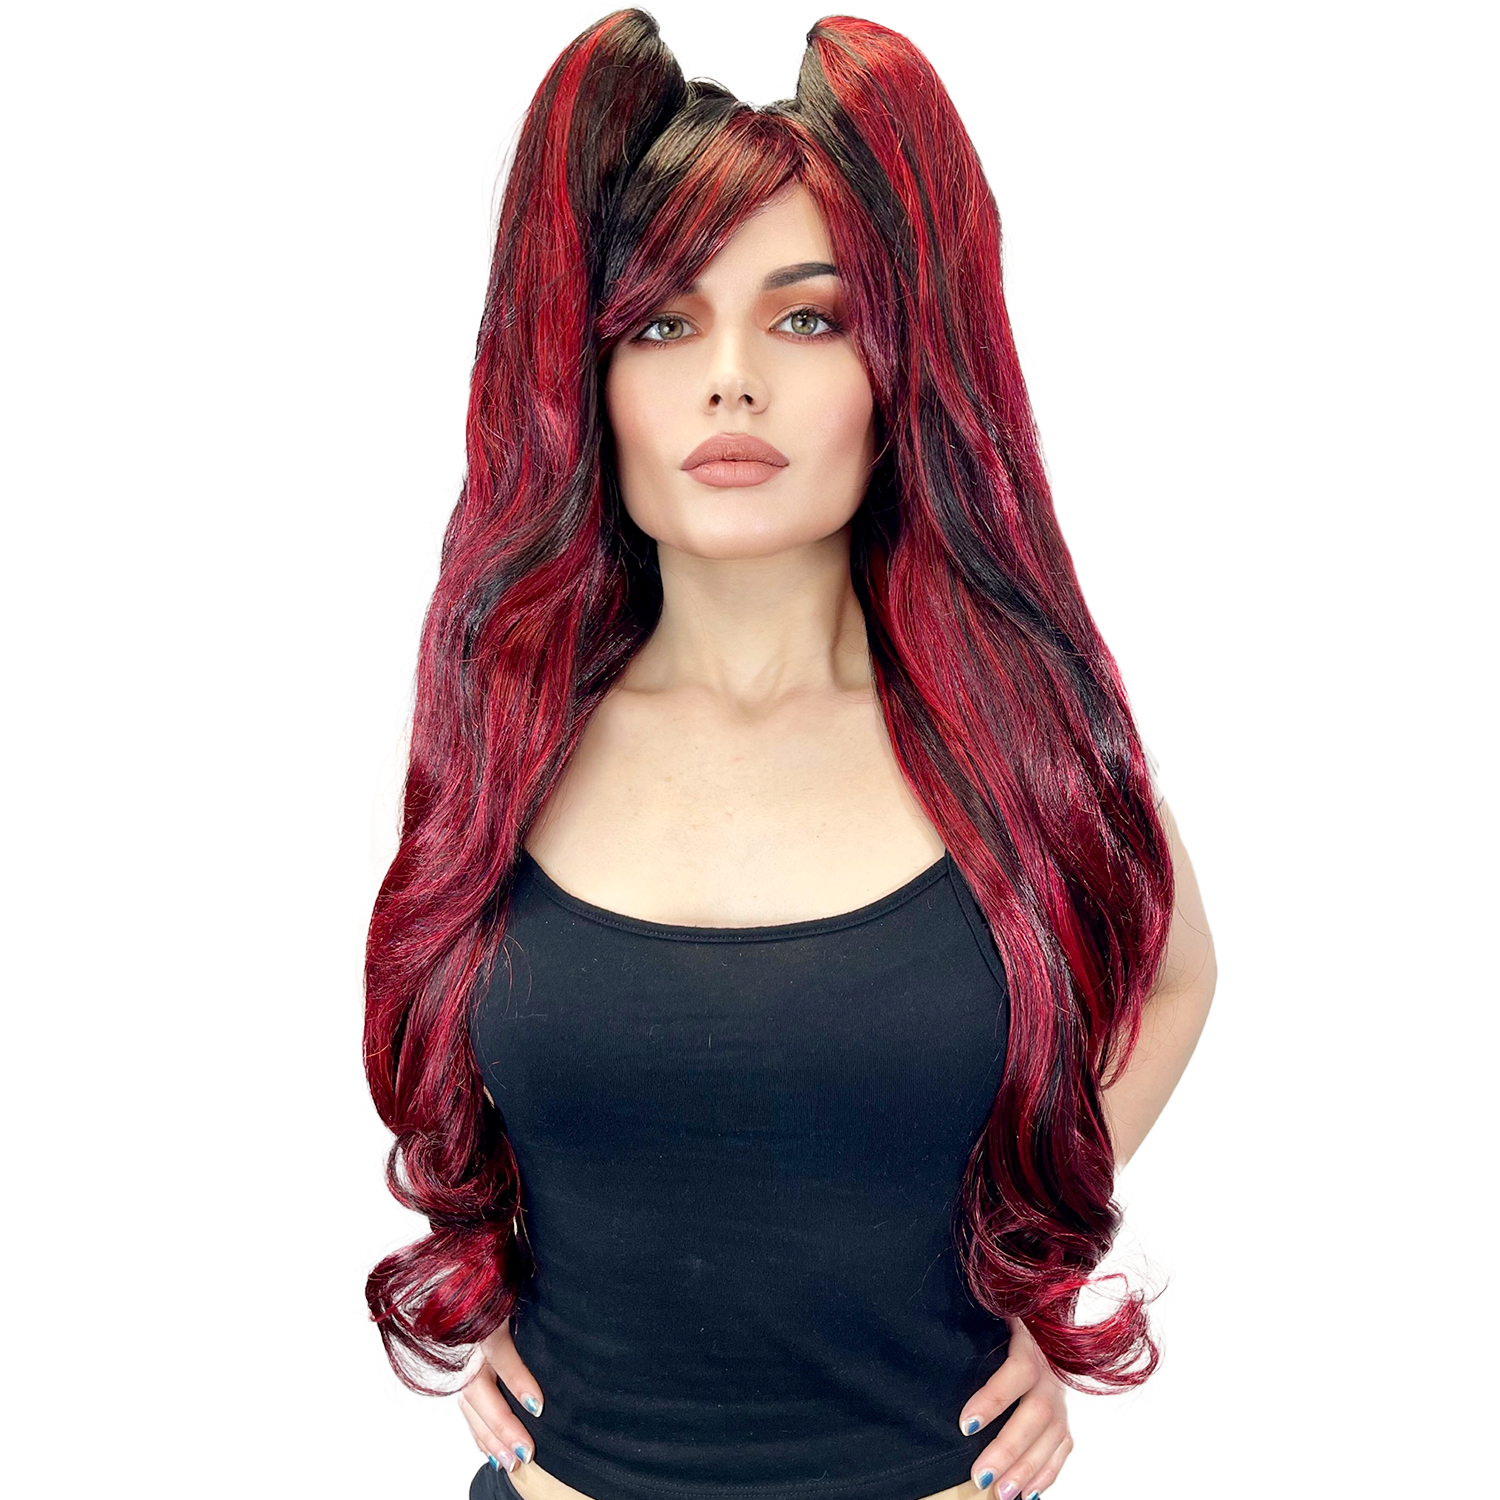 Black Color Long Curly Cosplay/Costume/Anime/Party Wig